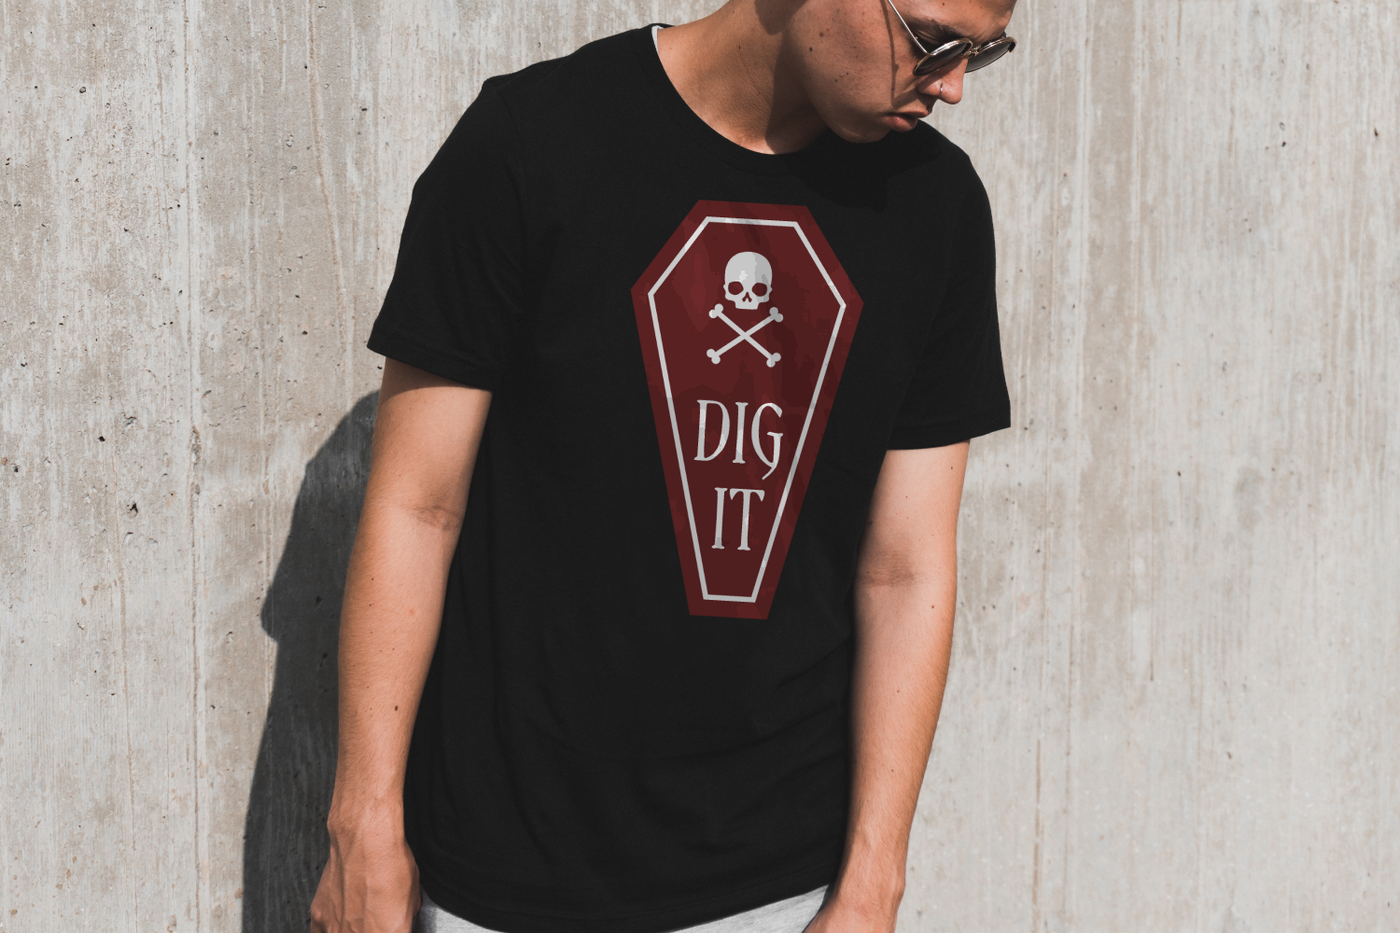 A white young man stands against a cement wall wearing a black tee and sunglasses. The shirt has a dark red coffin with a skull and crossbones and the words "Dig it" in a Gothic font.